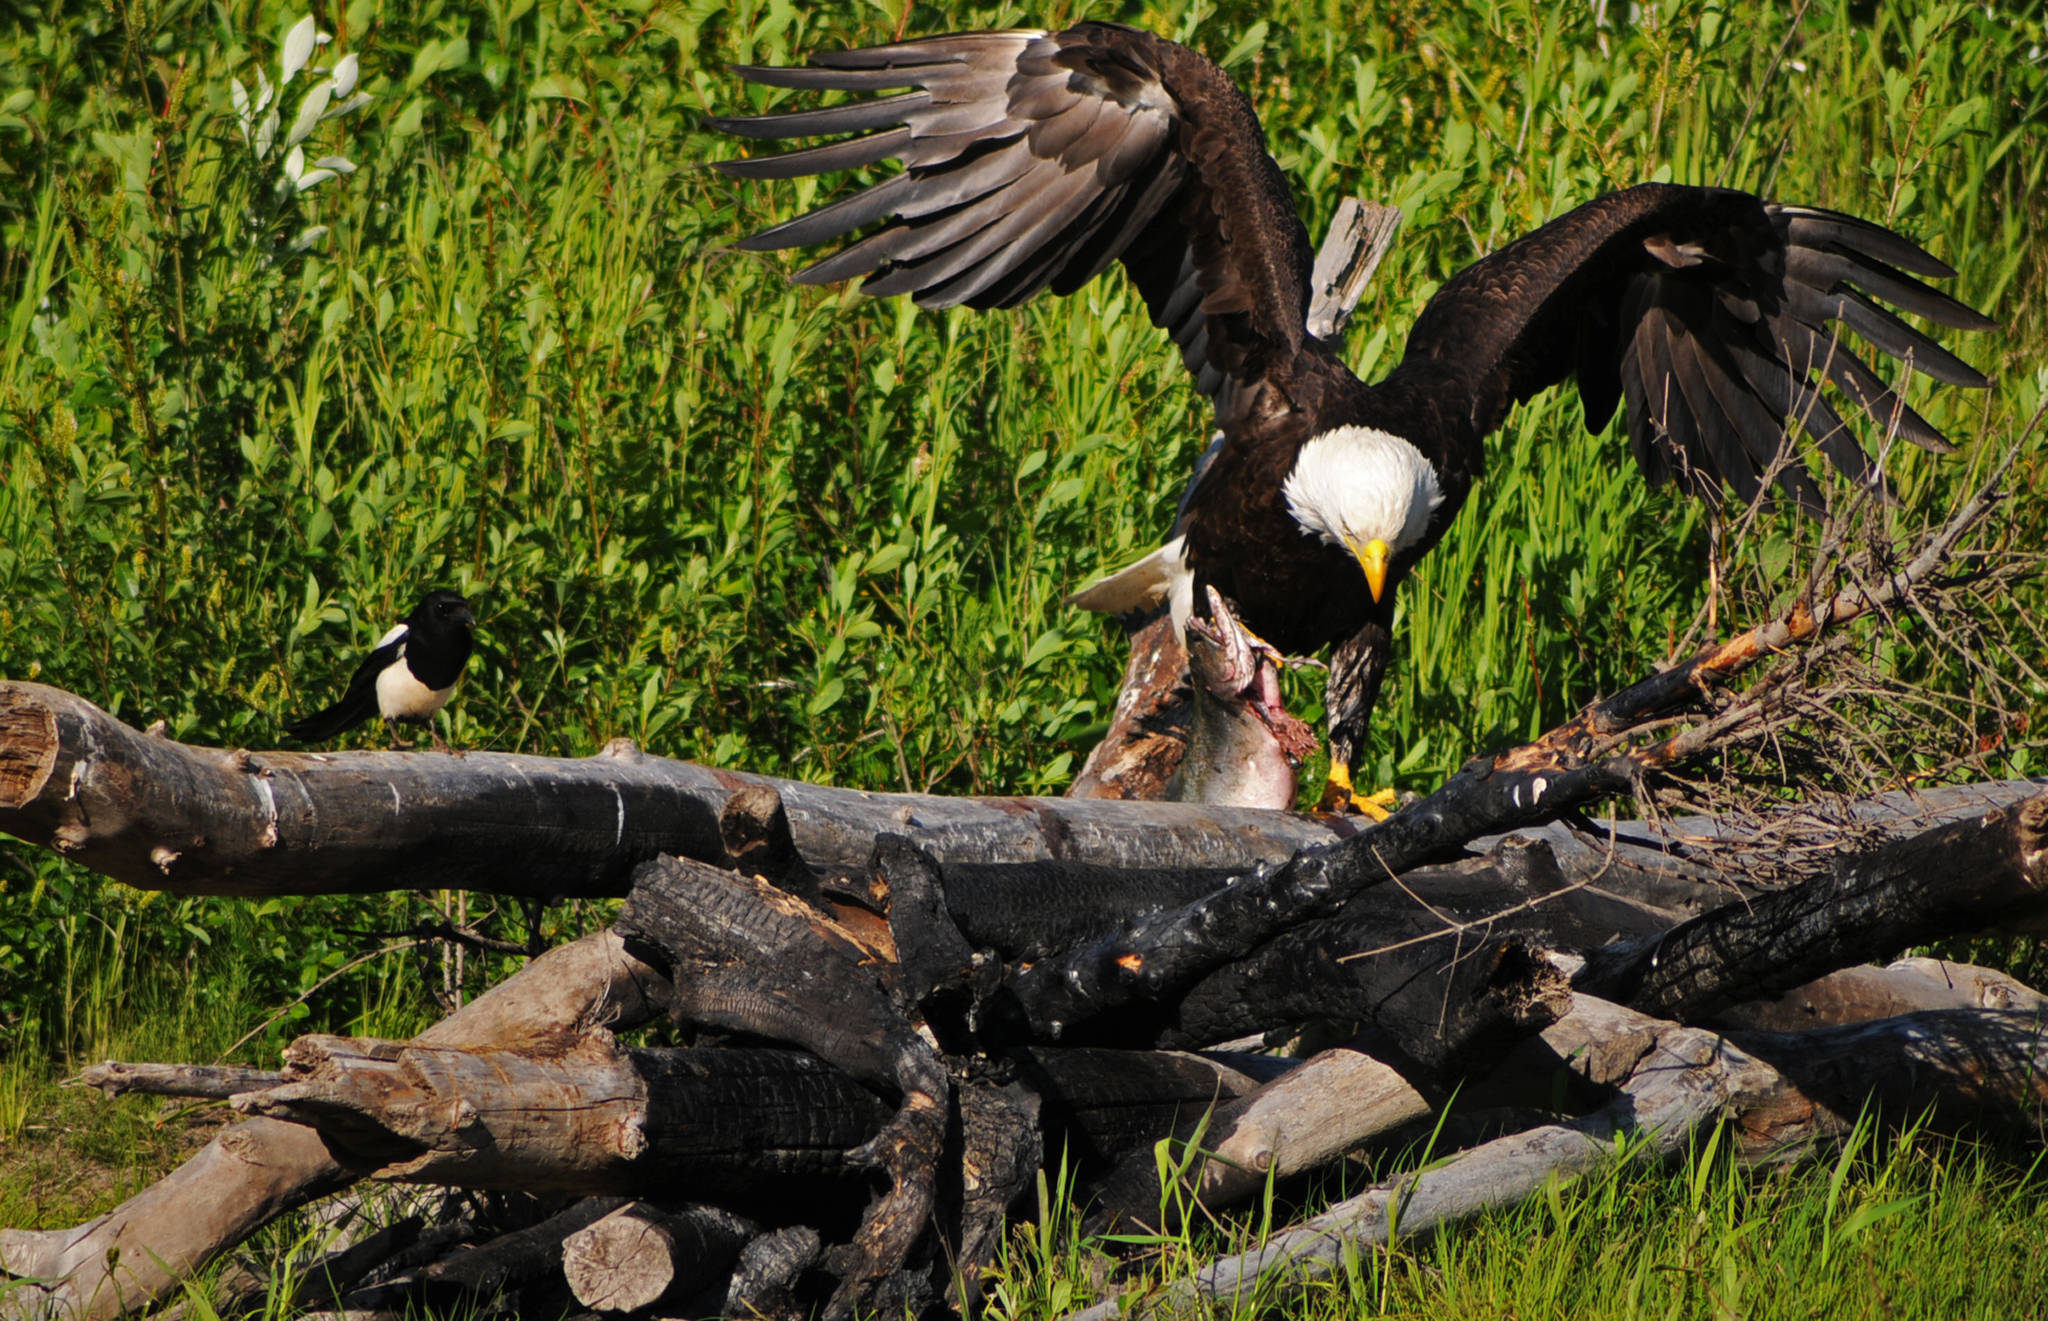 A bald eagle fends off a speculating magpie from his meal of salmon on the Anchor River on Sunday, June 25, 2017 near Anchor Point, Alaska. Though the Anchor River is closed to sportfishing for king salmon now, the salmon are still returning to the river, with about 4,064 kings past the weirs on the north and south forks of the river, within the escapement goal of 3,800&